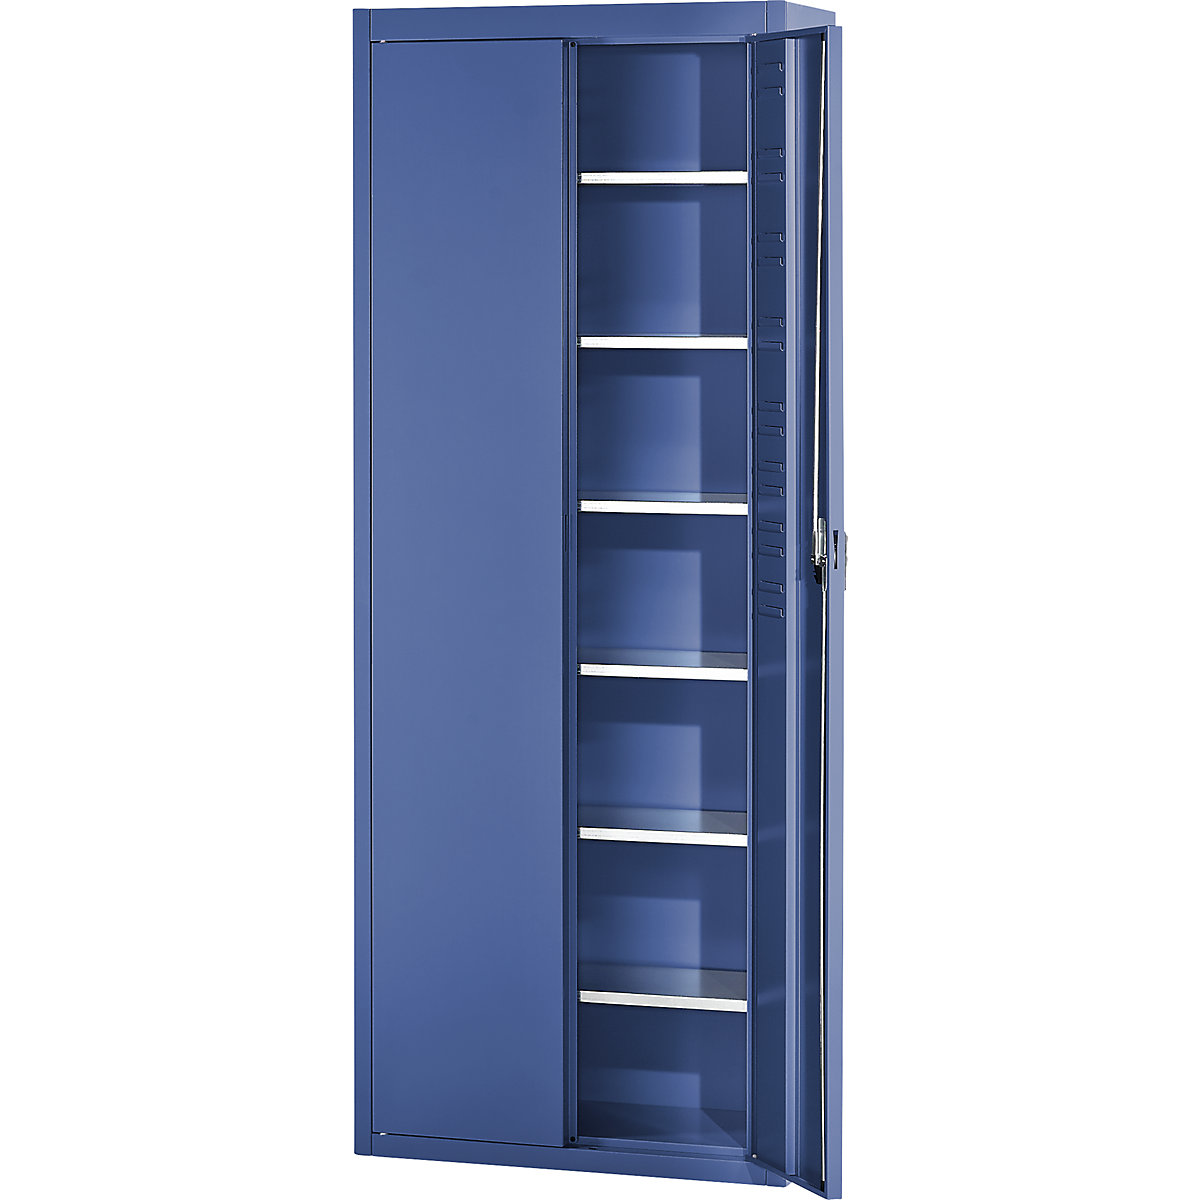 Storage cupboard, without open fronted storage bins – mauser, HxWxD 2150 x 680 x 280 mm, single colour, blue-7